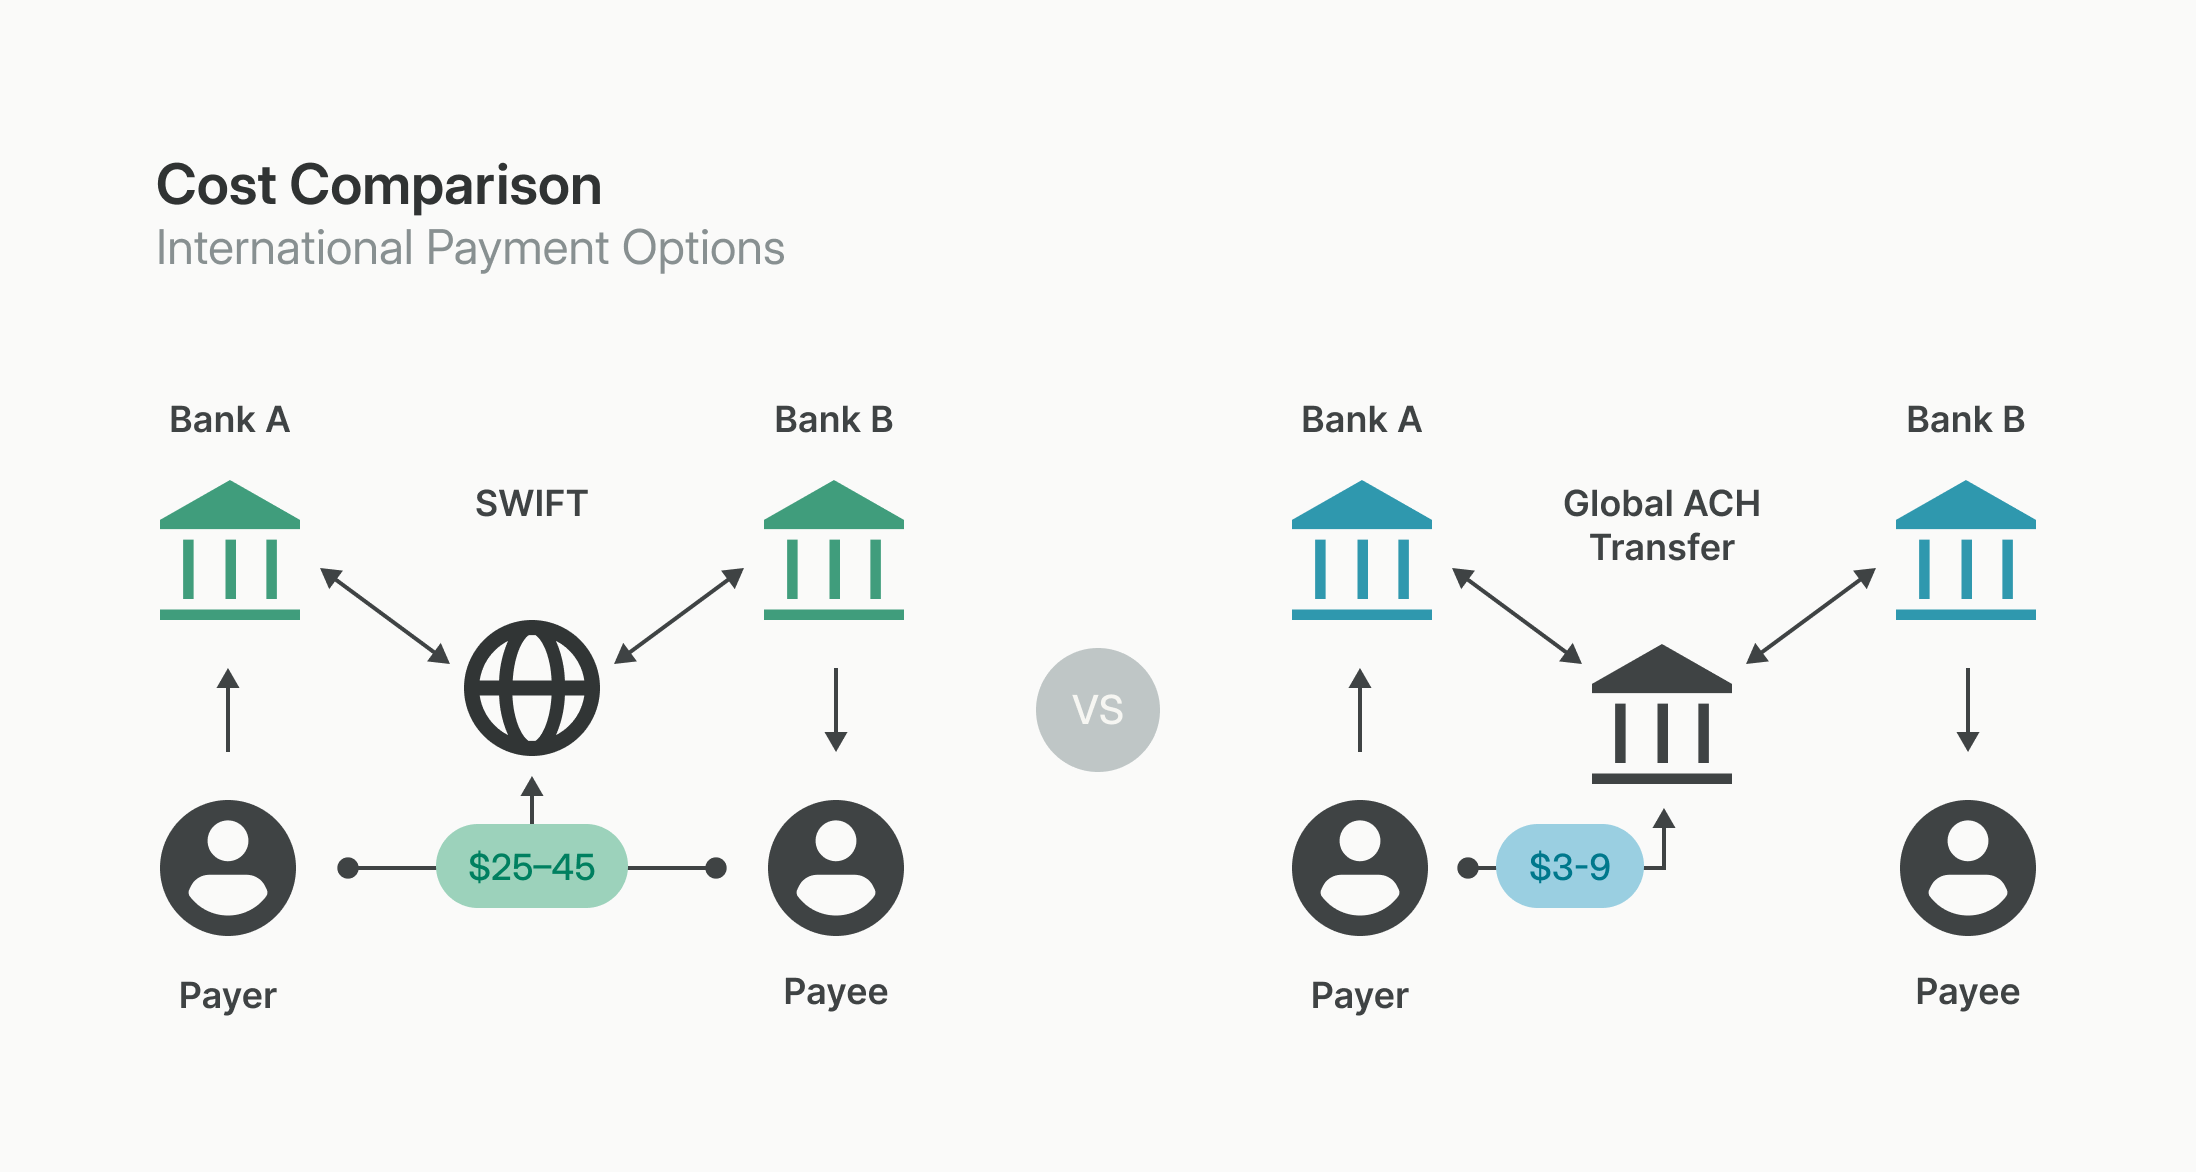 A cost comparison between SWIFT and Global ACH. With SWIFT, both Payer and Payee may be responsible for transaction fees, but with Global ACH only the Payer is responsible for the transaction fee. 